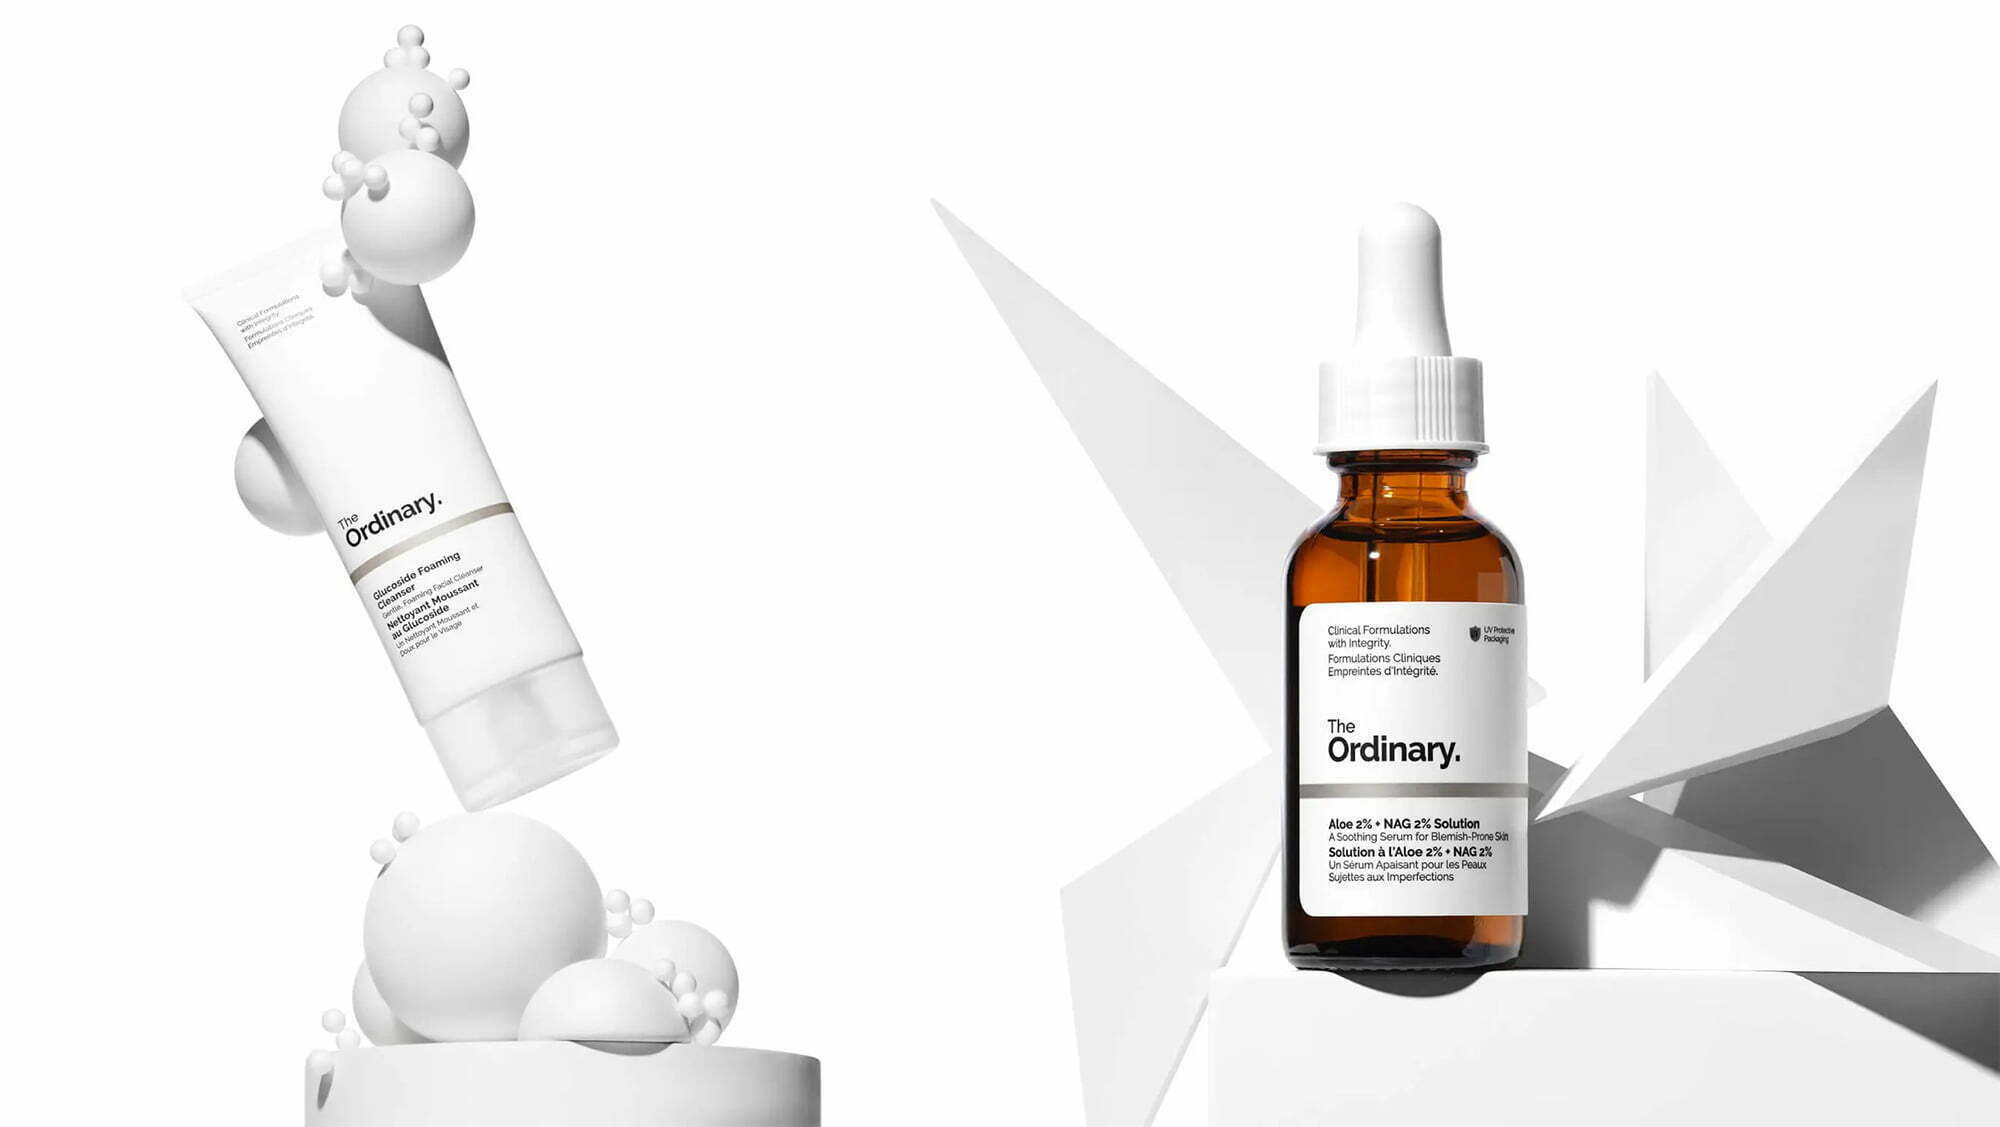 New launches from The Ordinary